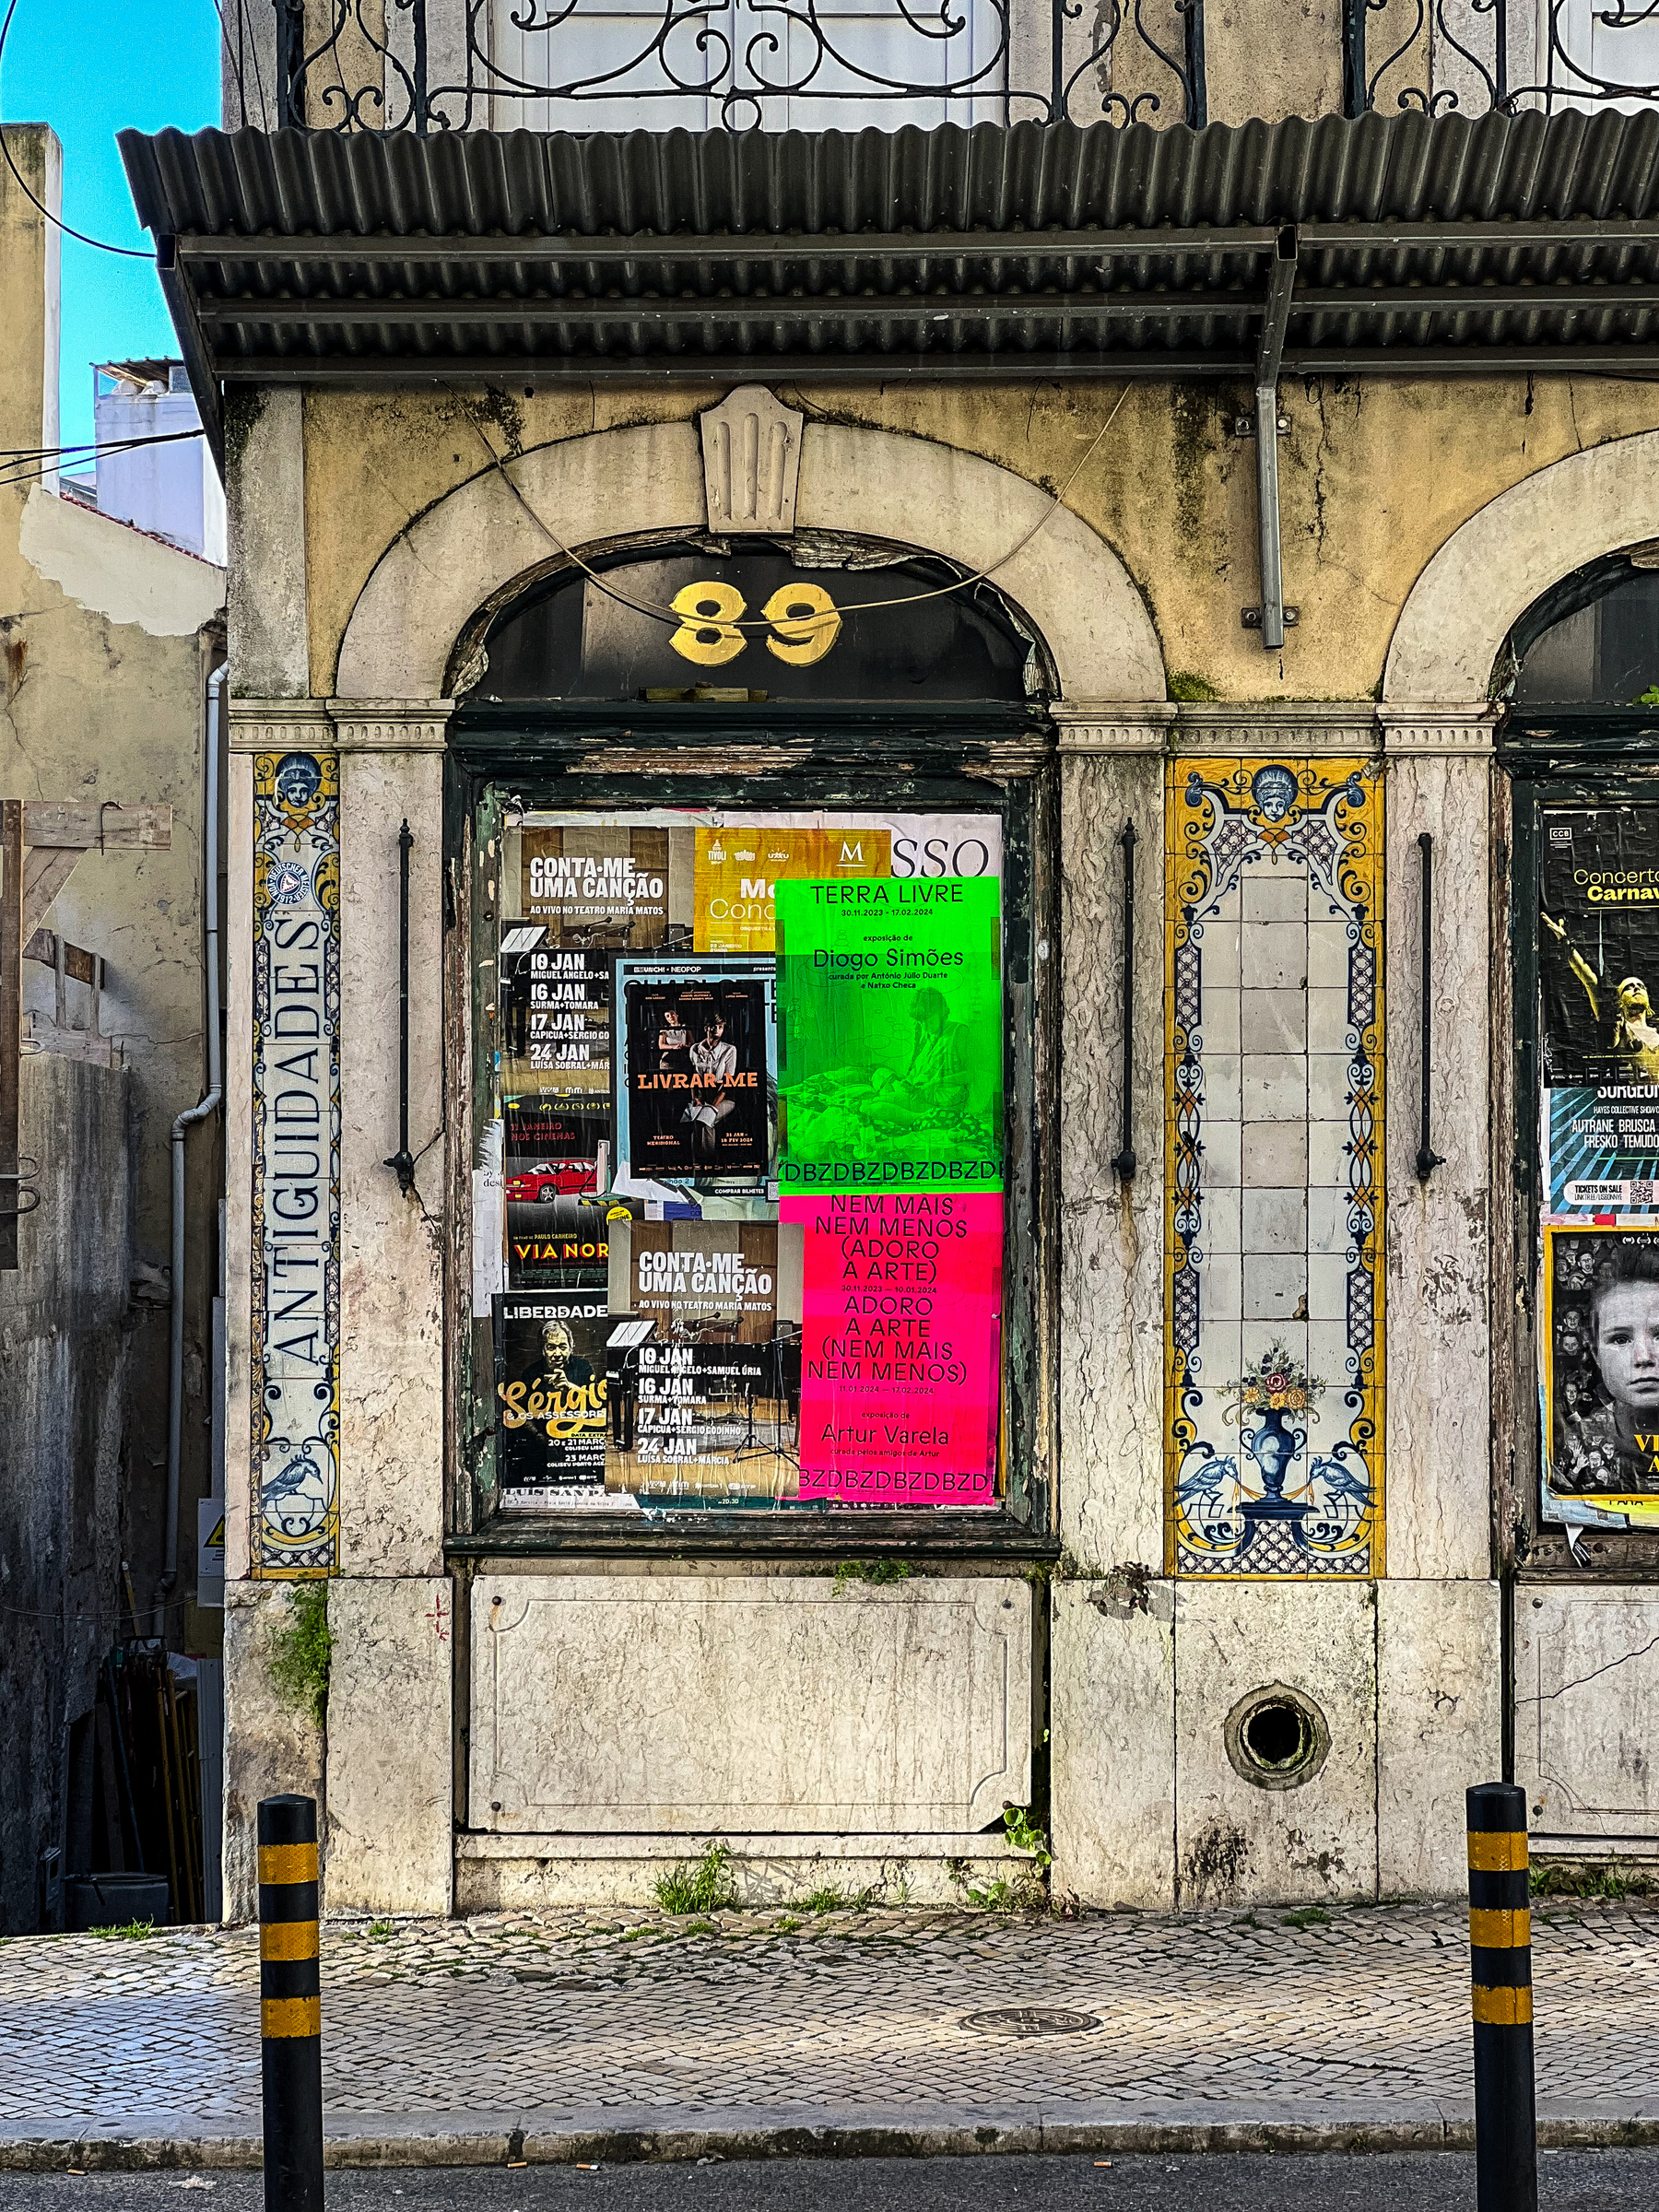 An old storefront with faded paint and decorative tiles, displaying numerous colorful event posters and a sign with &ldquo;89&rdquo; above the window.